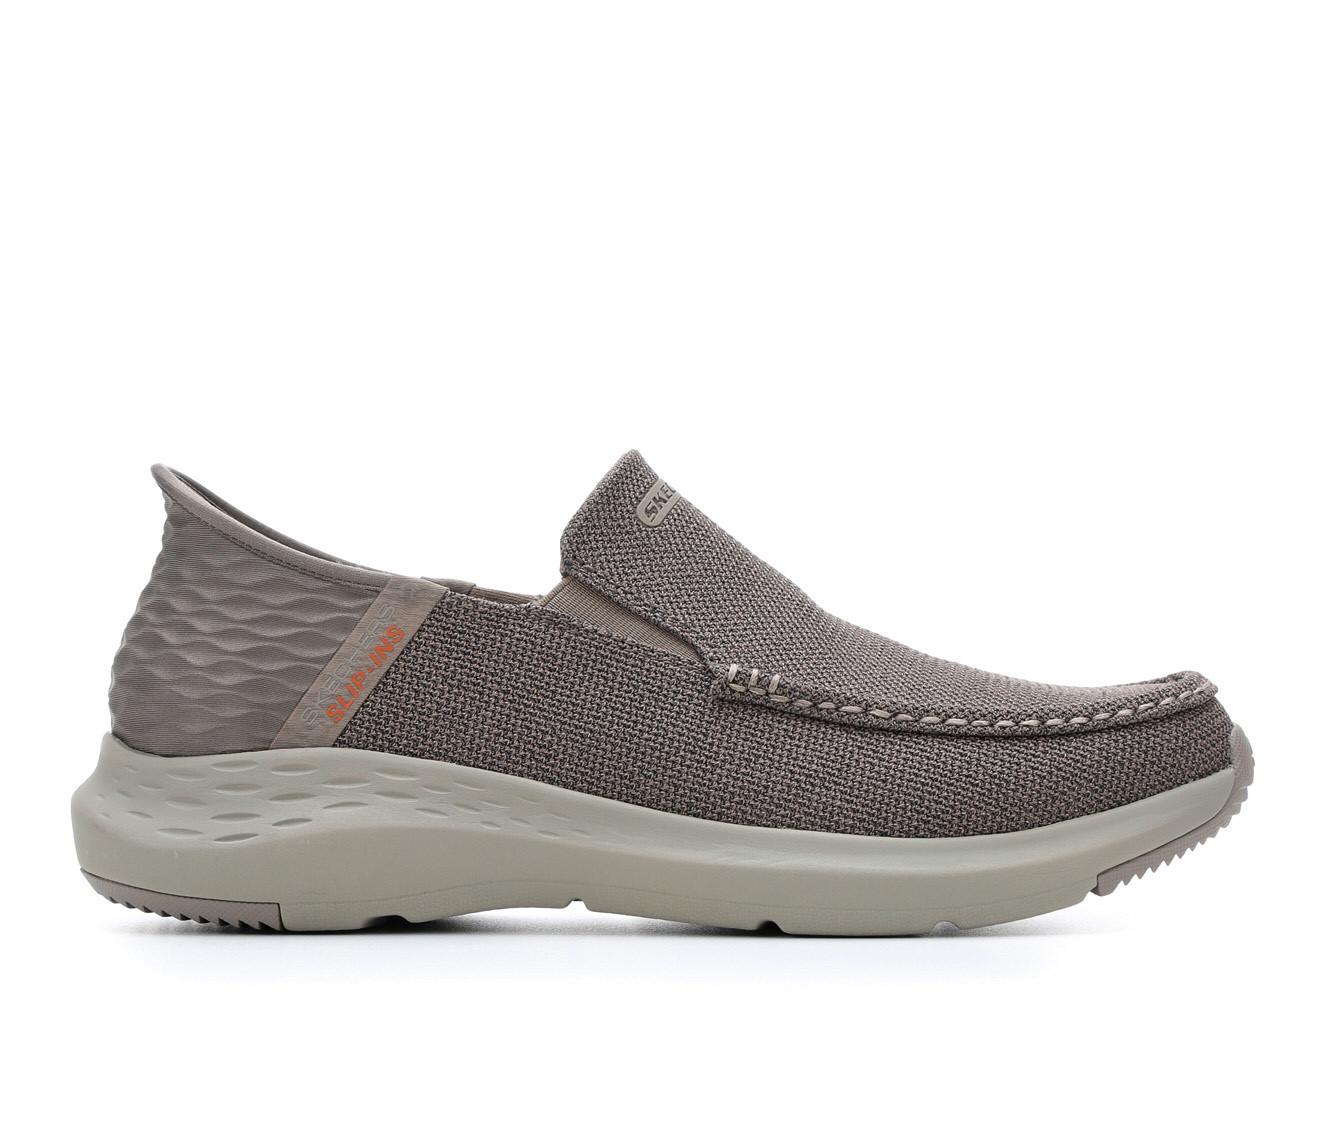 Buy Skechers Women's ON THE GO FLEX Brown Casual Shoes for Women